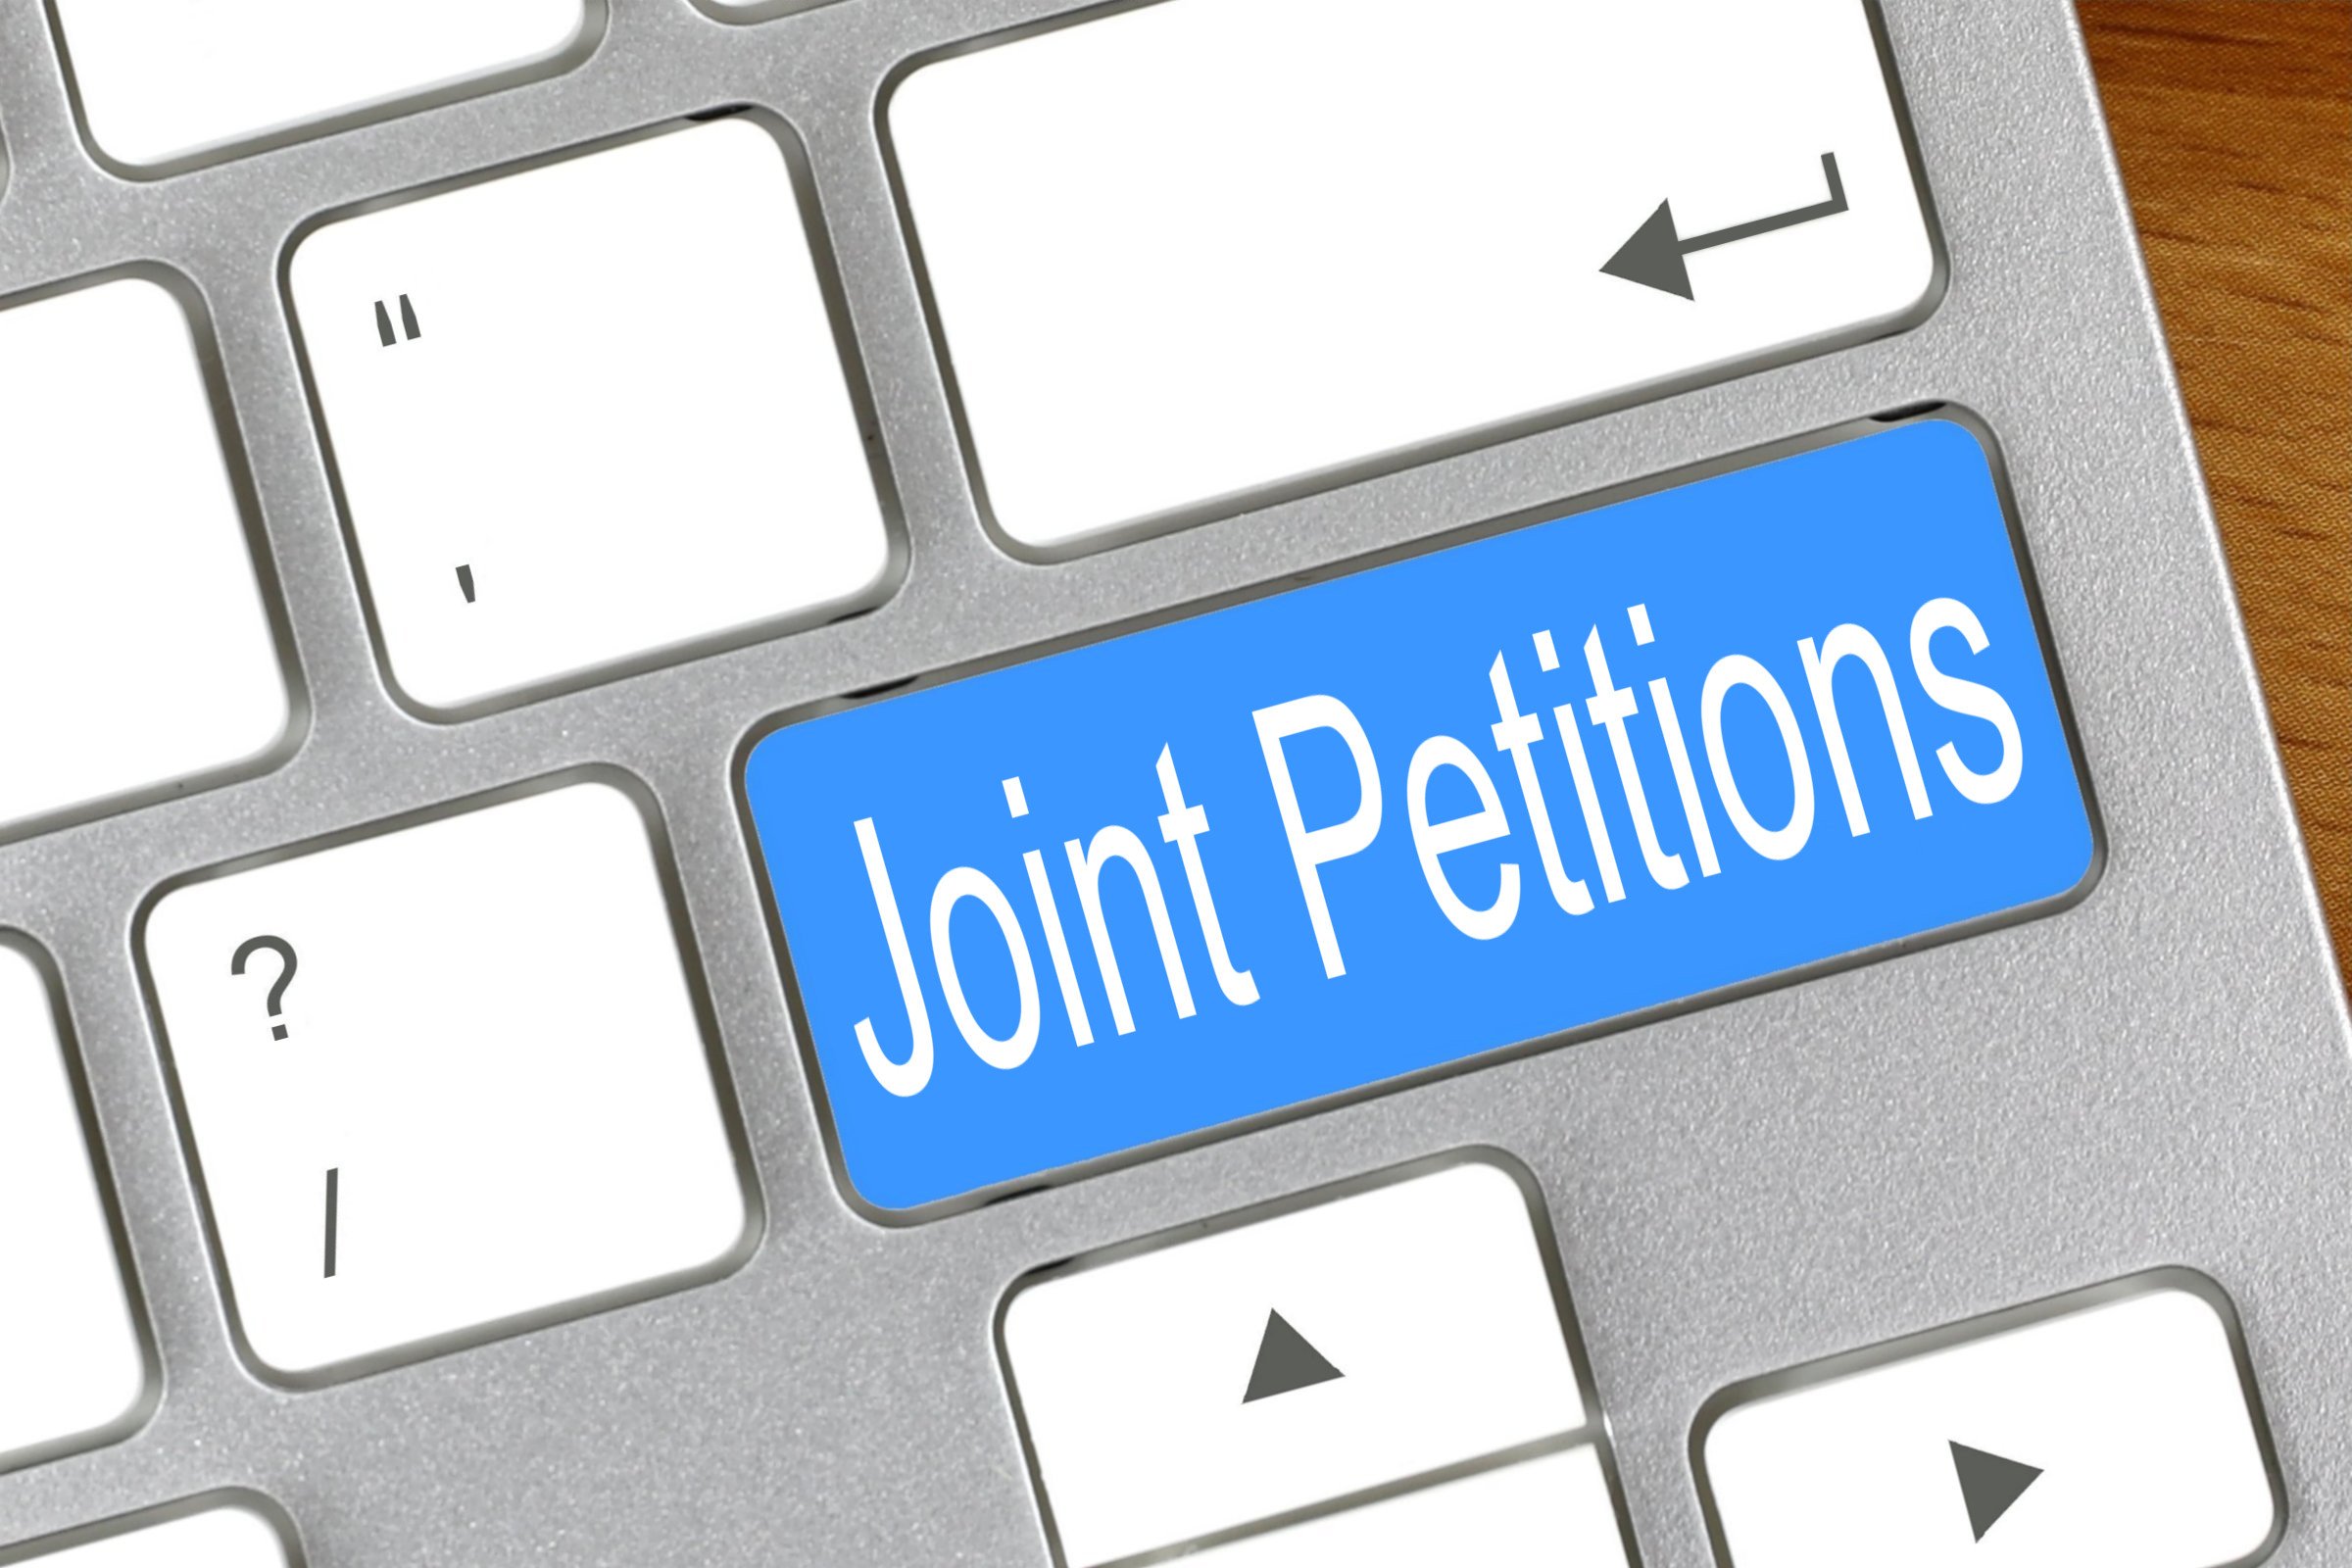 joint petitions